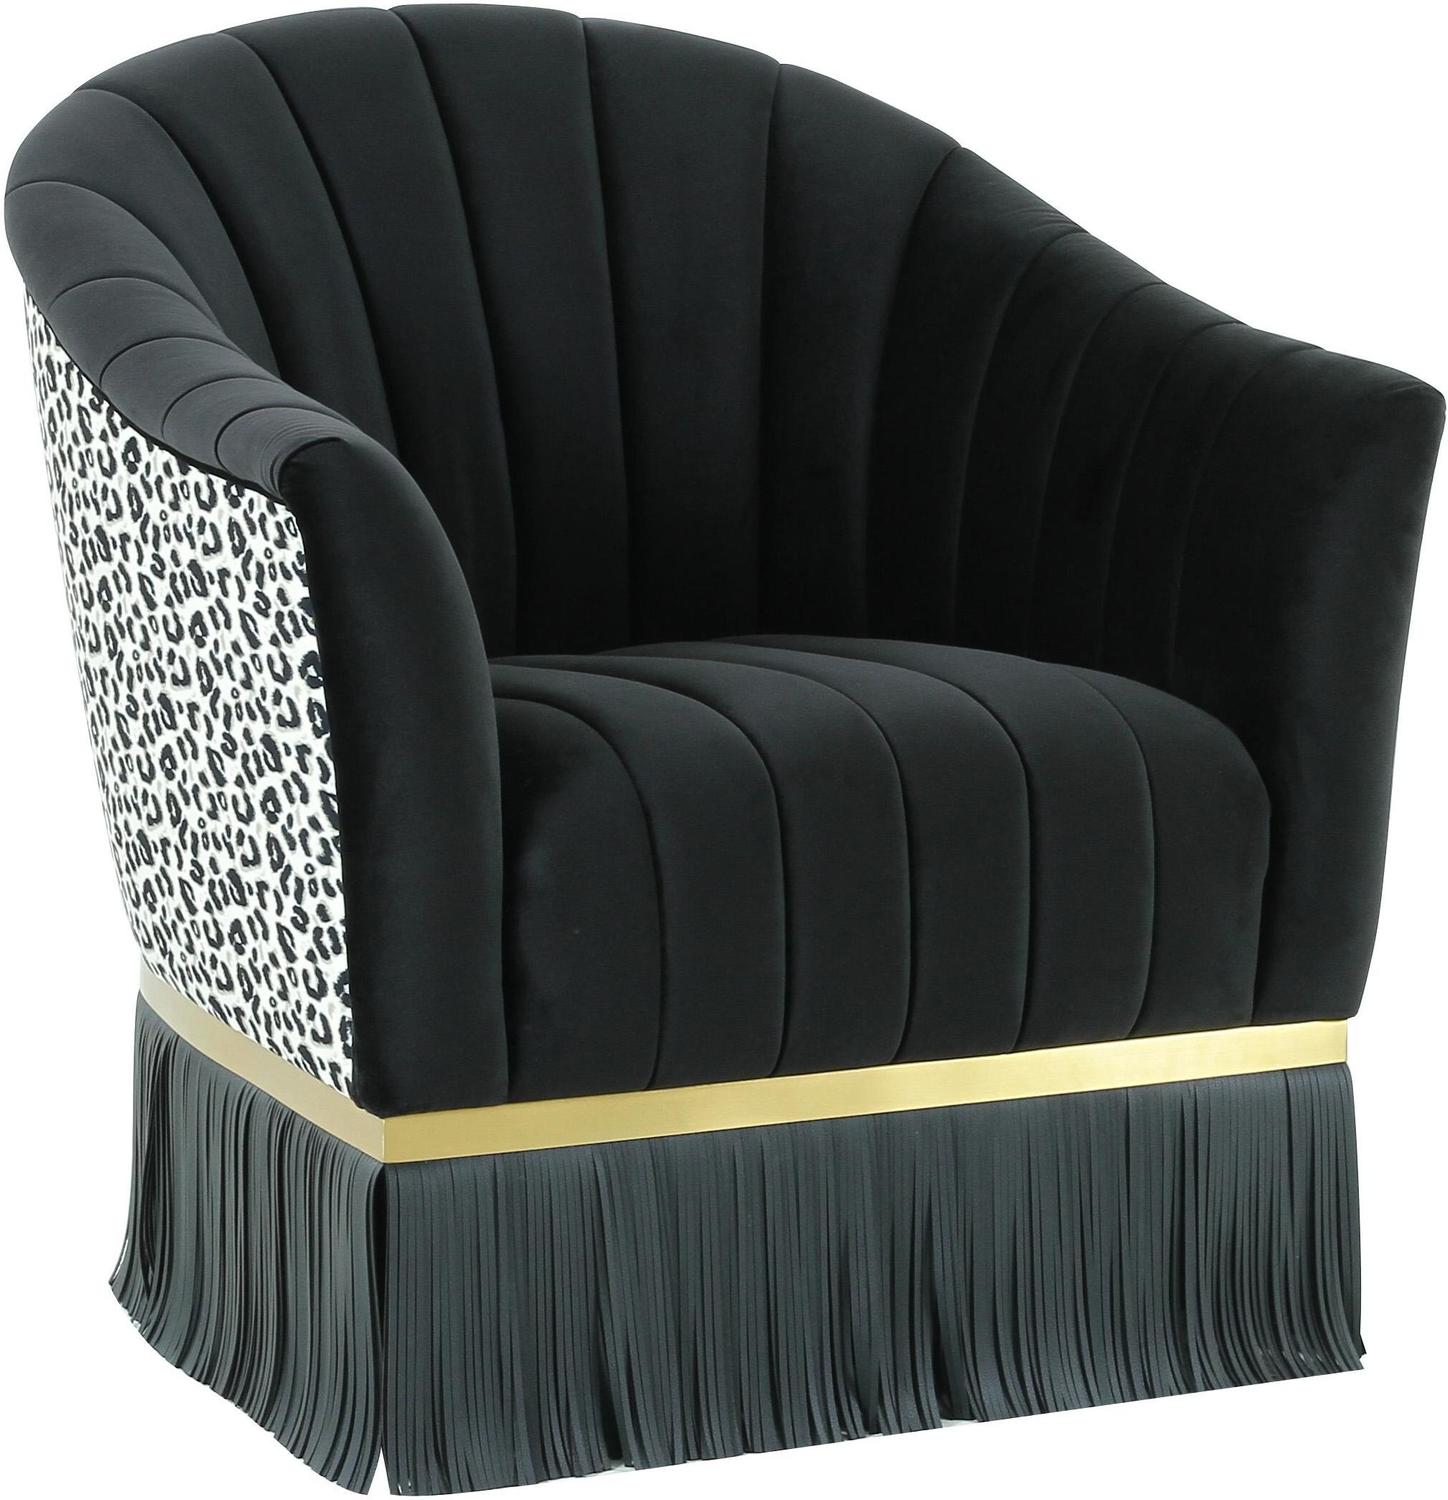 Tov Furniture Accent Chairs Chairs Black,Leopard